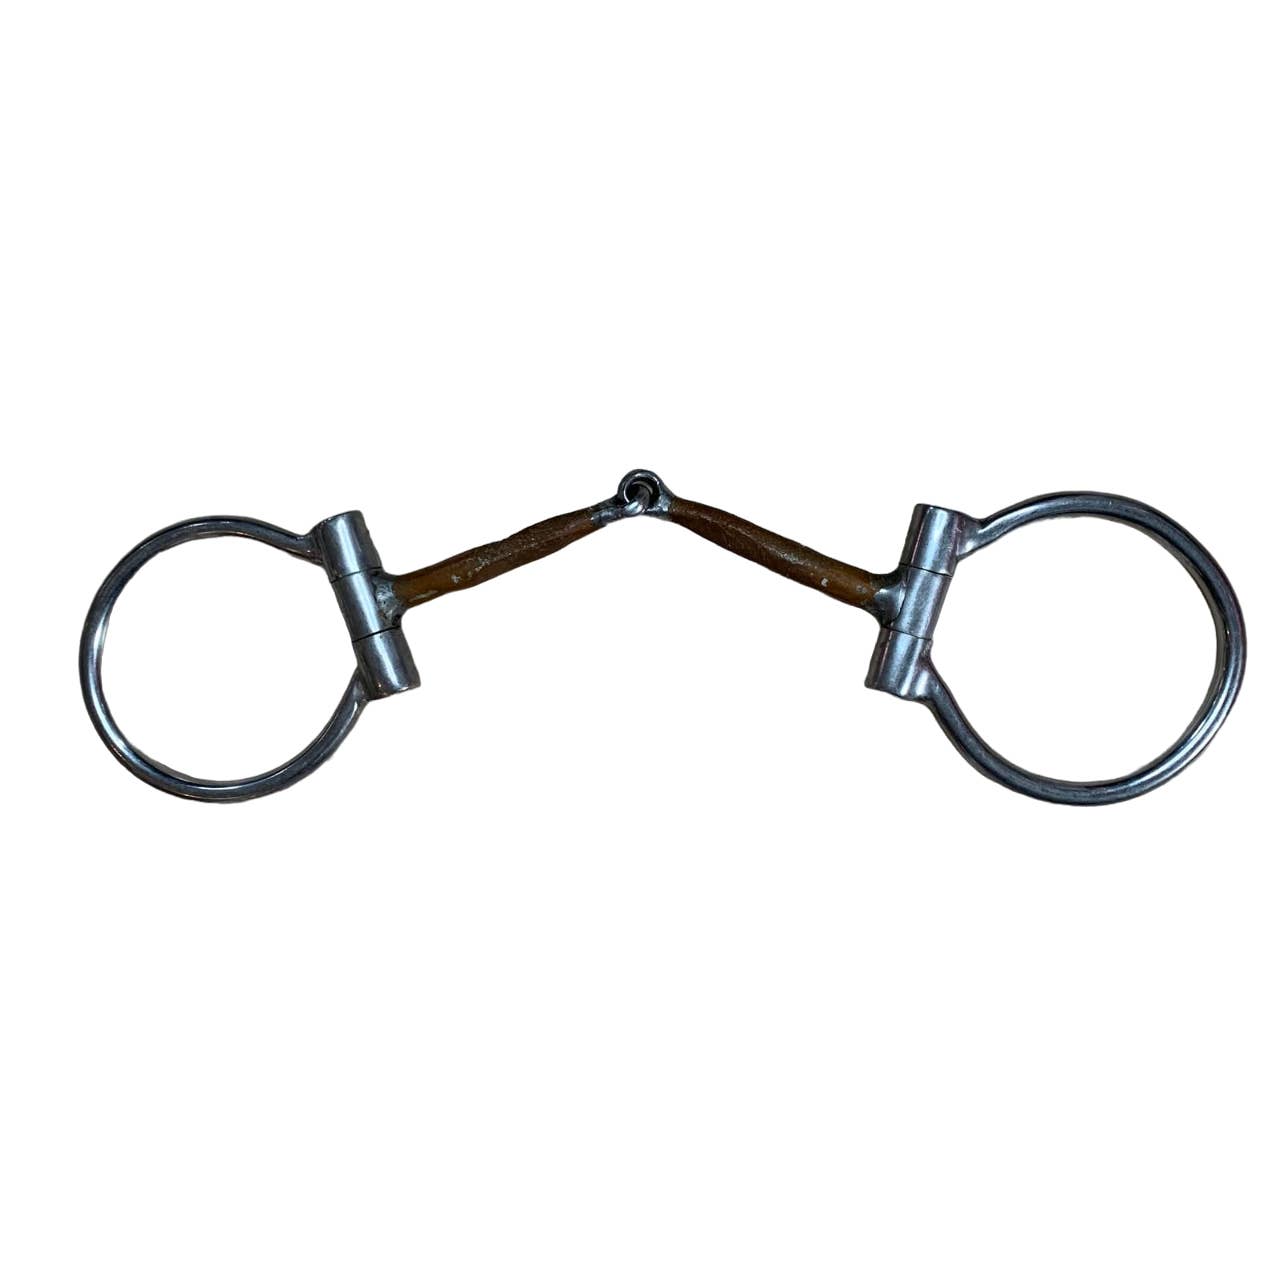 Copper Dee Ring Snaffle in Stainless Steel - 5"